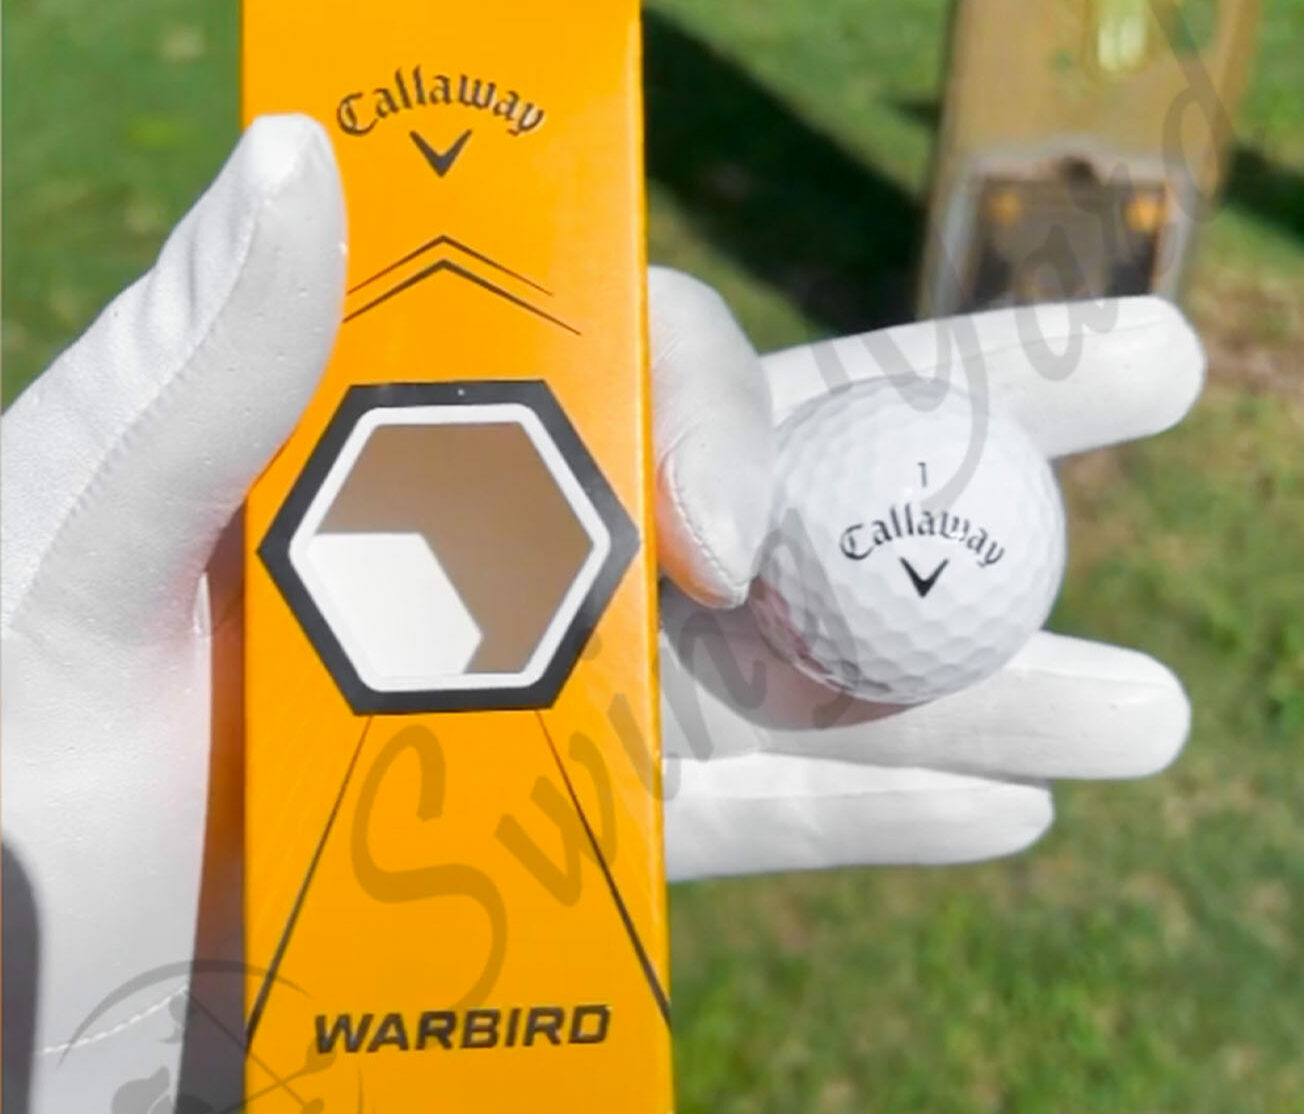 Me holding Callaway Warbird pack and a ball for testing